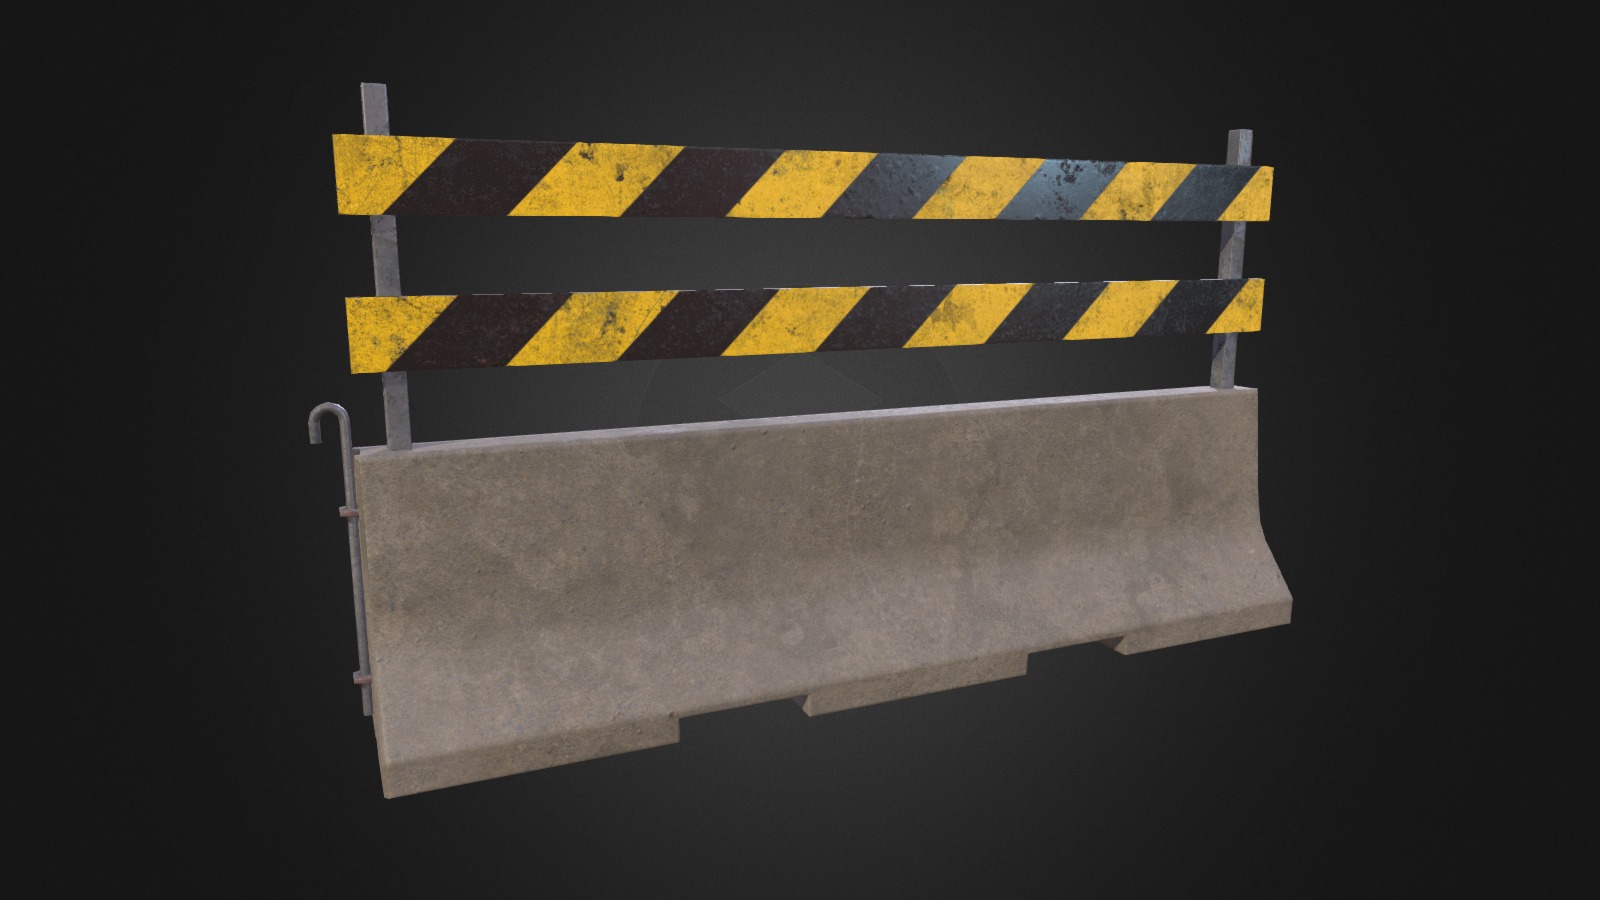 Concrete Barrier for my Unreal Engine 4 collection.
- Verts: 290
- Tris: 520

Textures:
2048x2048 (Albedo, Normal, Roughness, Metallic) - Concrete Barrier v2_1 - 3D model by Longjing 3d model